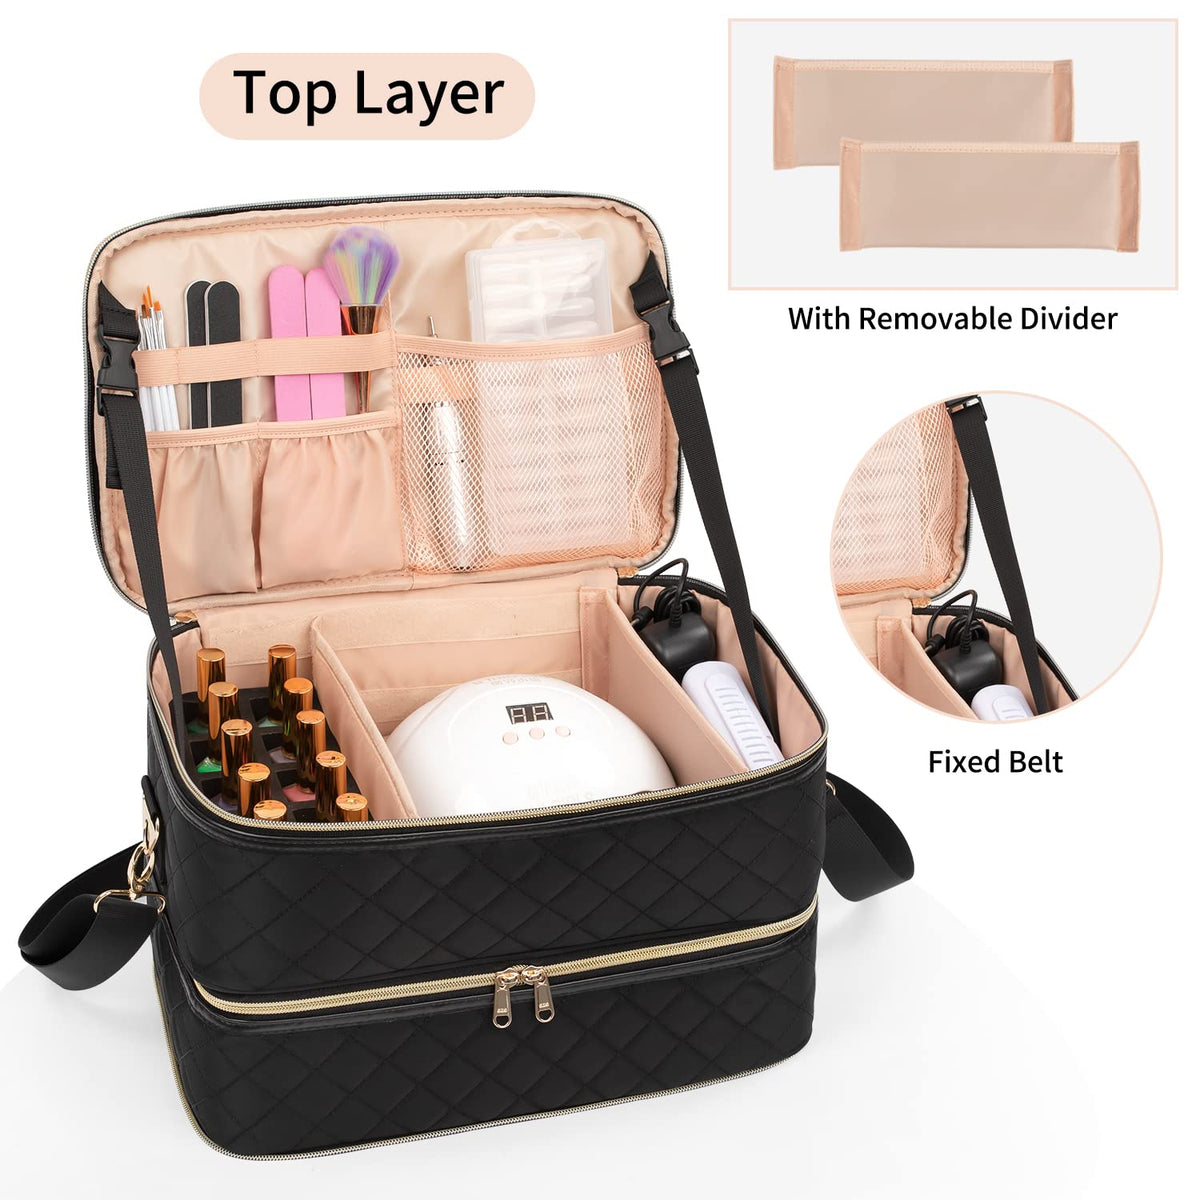 Relavel Makeup Bag Travel Makeup Train Case 13.8 inches Large Cosmetic Case  Professional Portable Makeup Brush